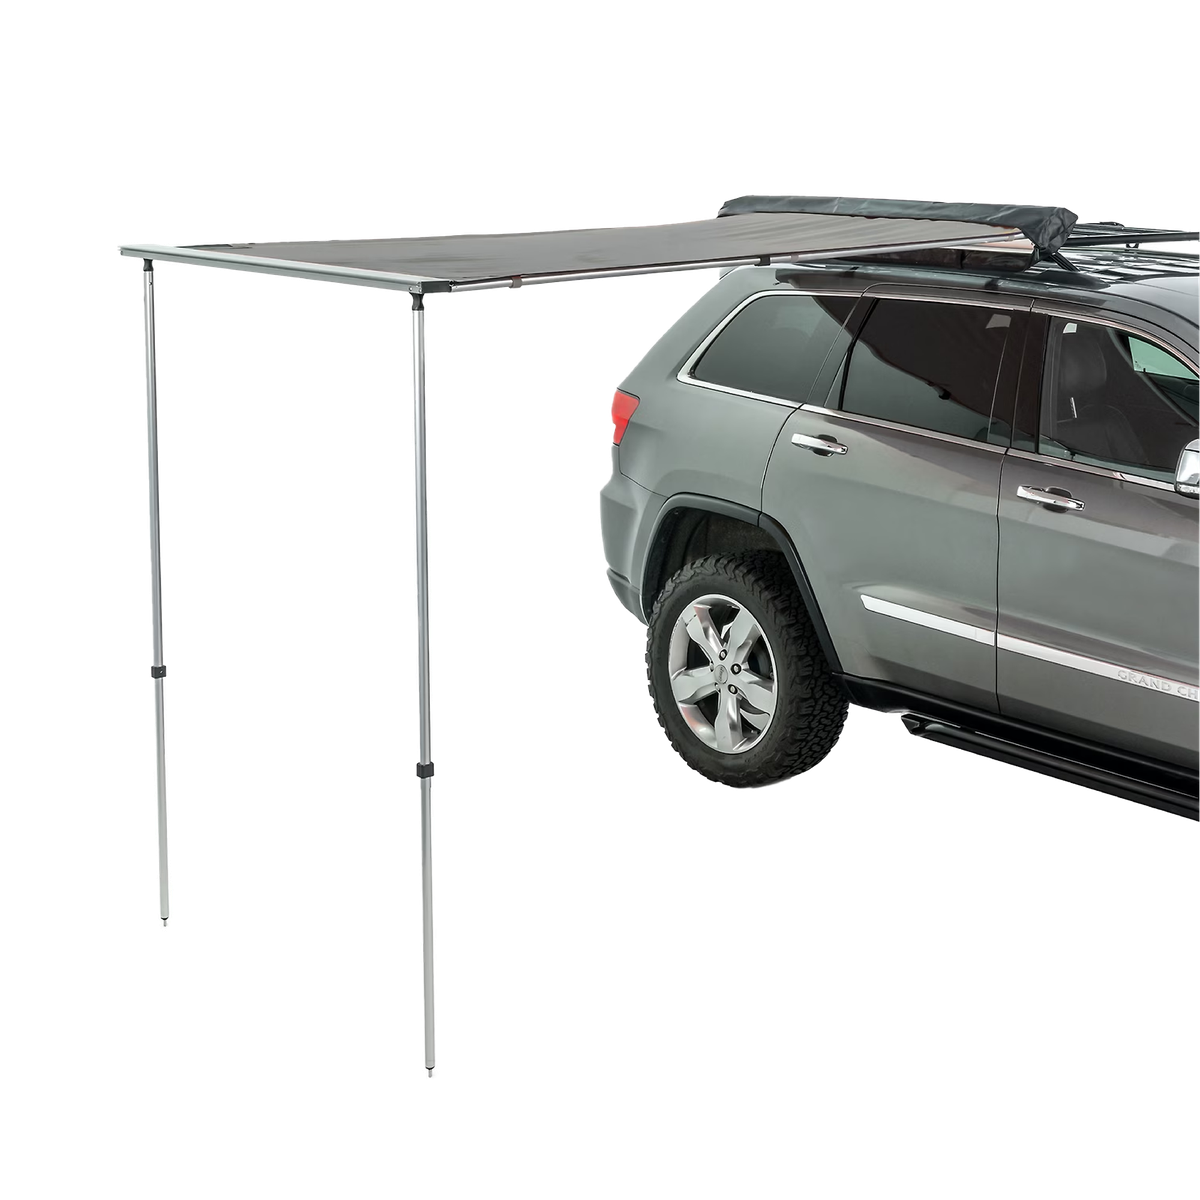 Thule OverCast awning